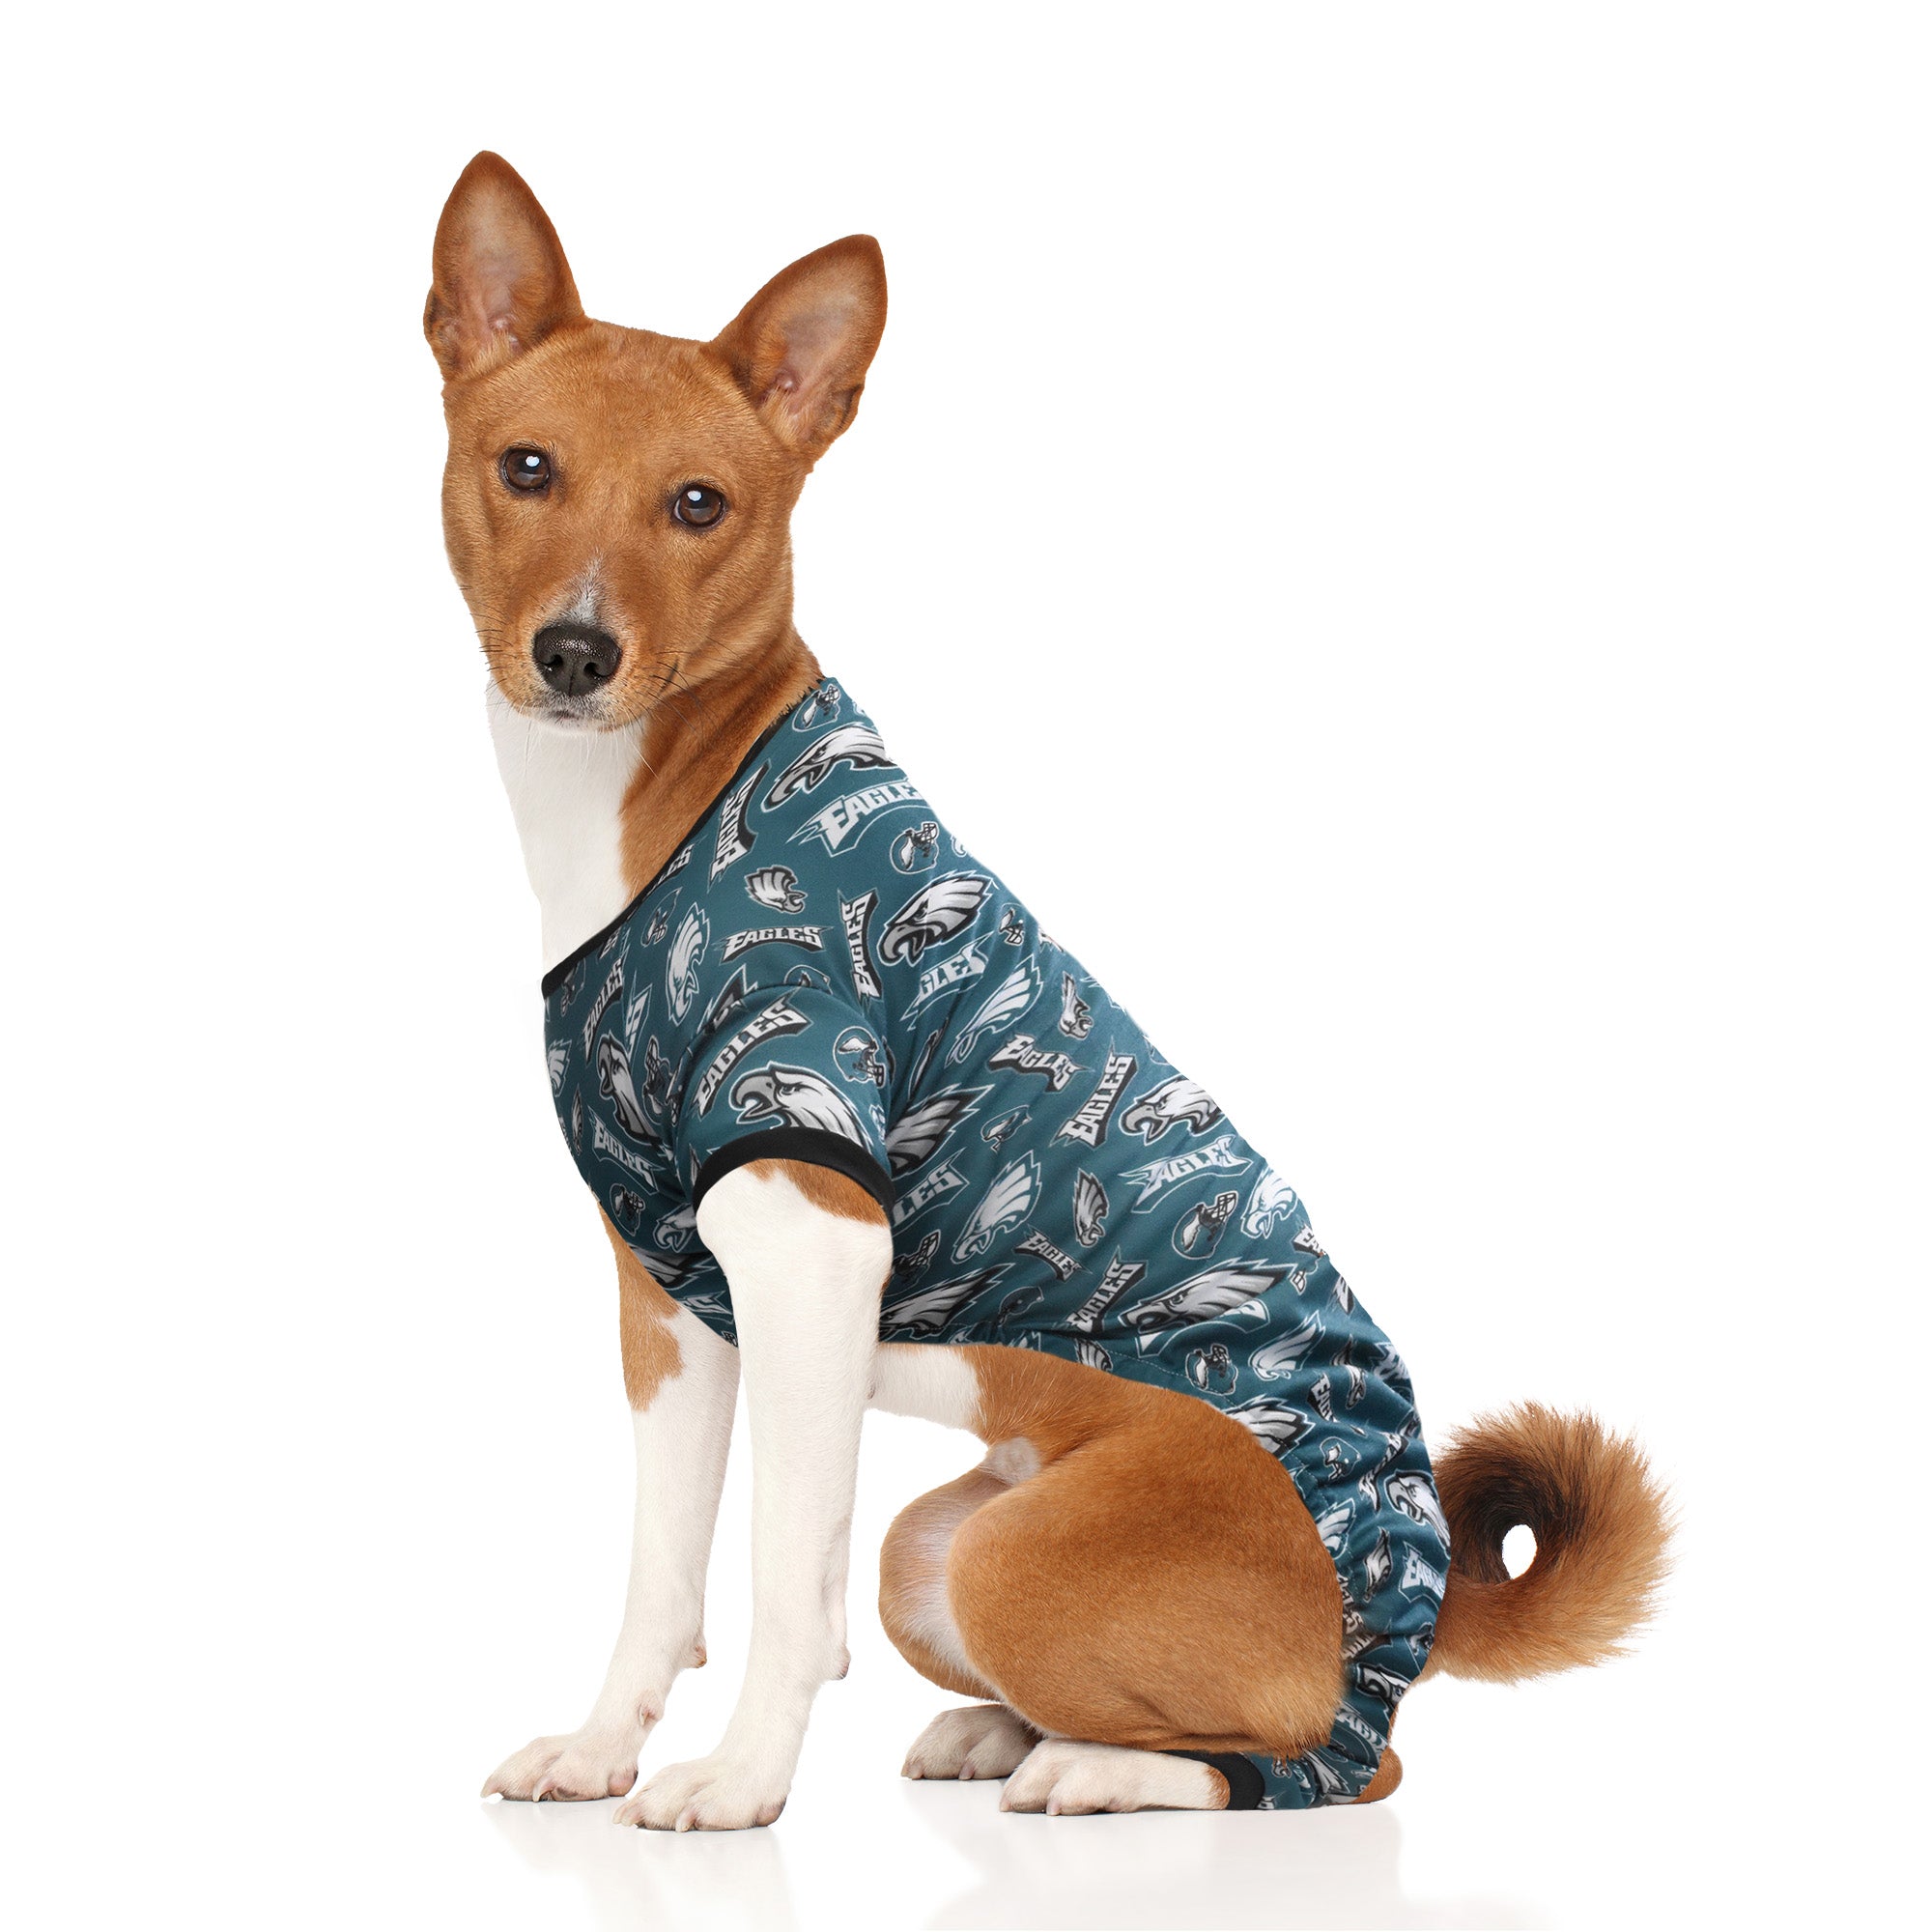 eagles gear for dogs